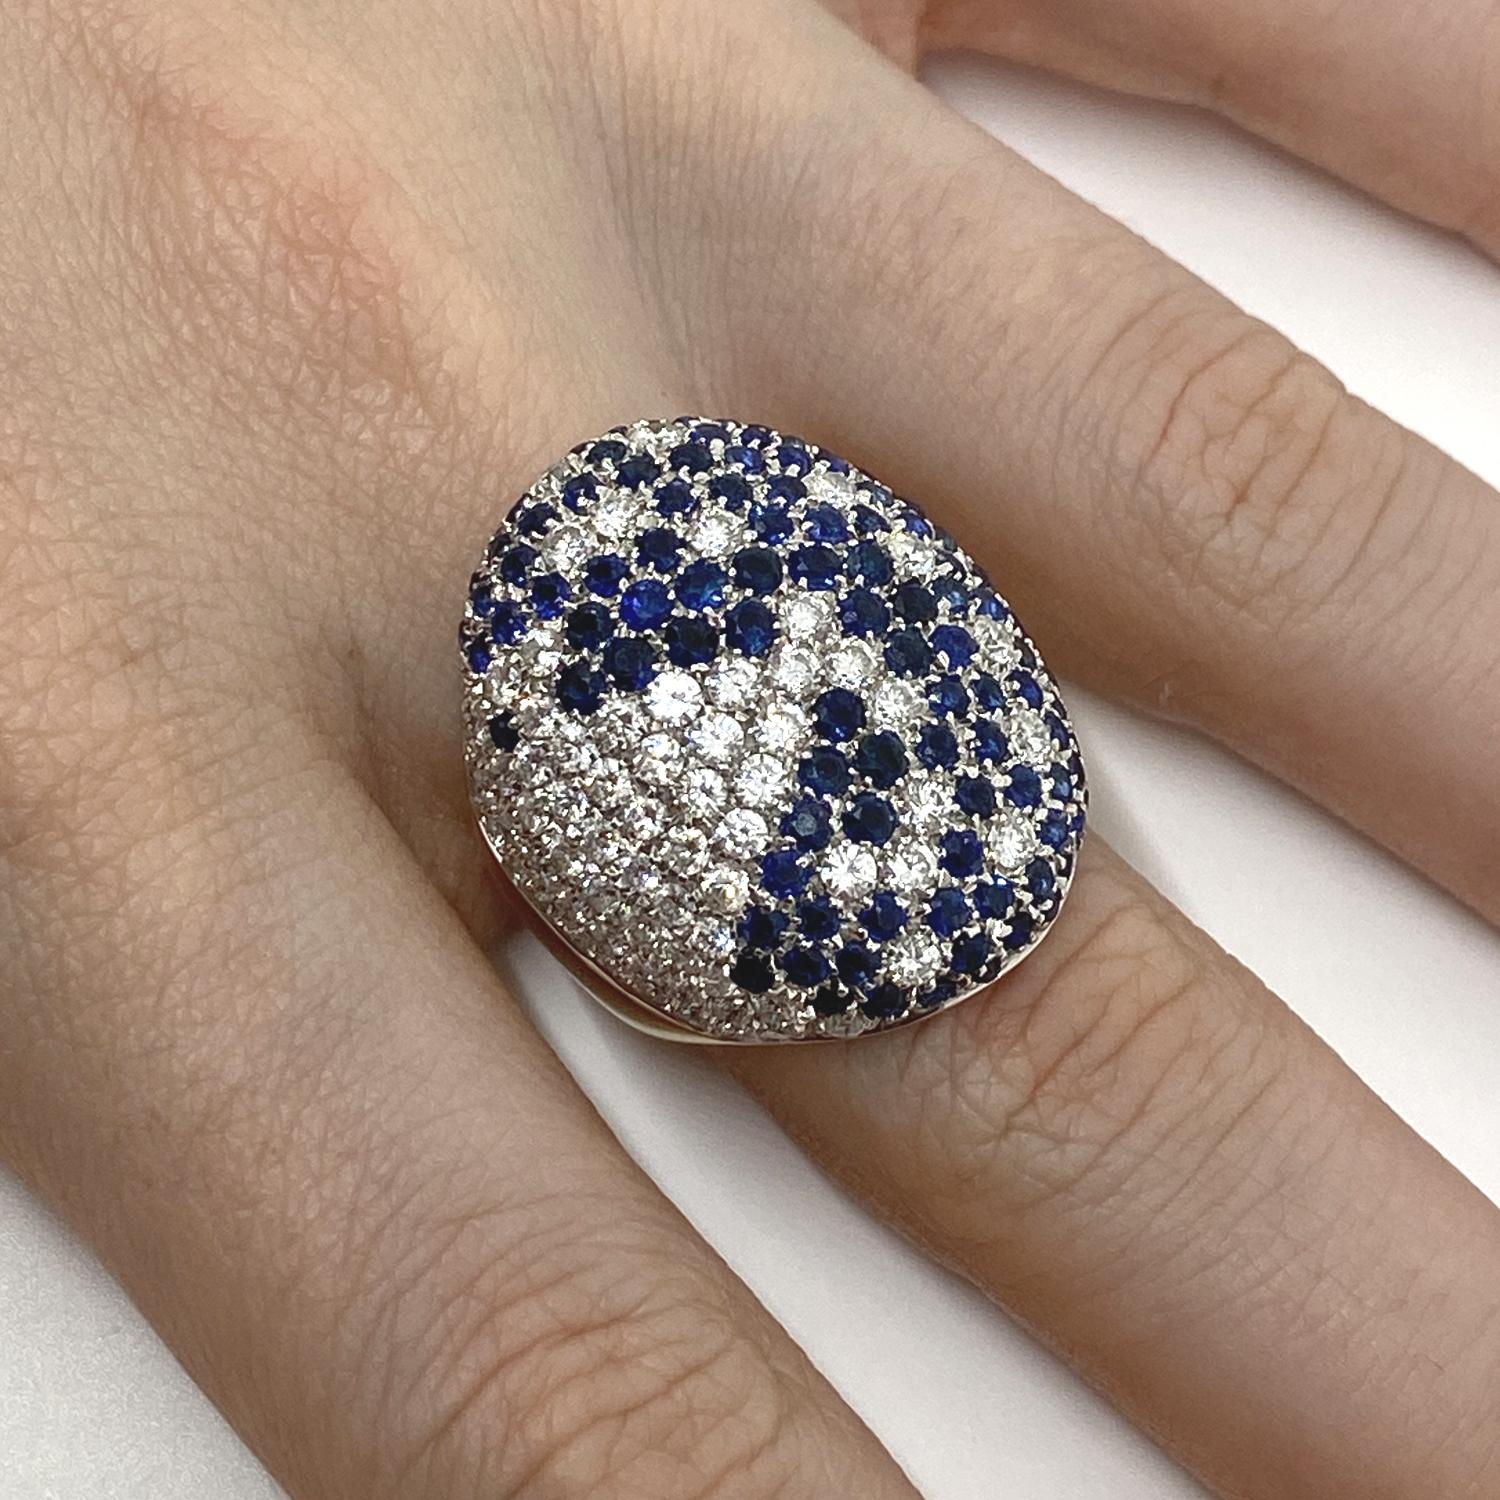 18 kt yellow gold band ring with natural brilliant-cut diamonds for ct.2.43 and natural brilliant-cut blue sapphires for ct.8.55

Welcome to our jewelry collection, where every piece tells a story of timeless elegance and unparalleled craftsmanship.